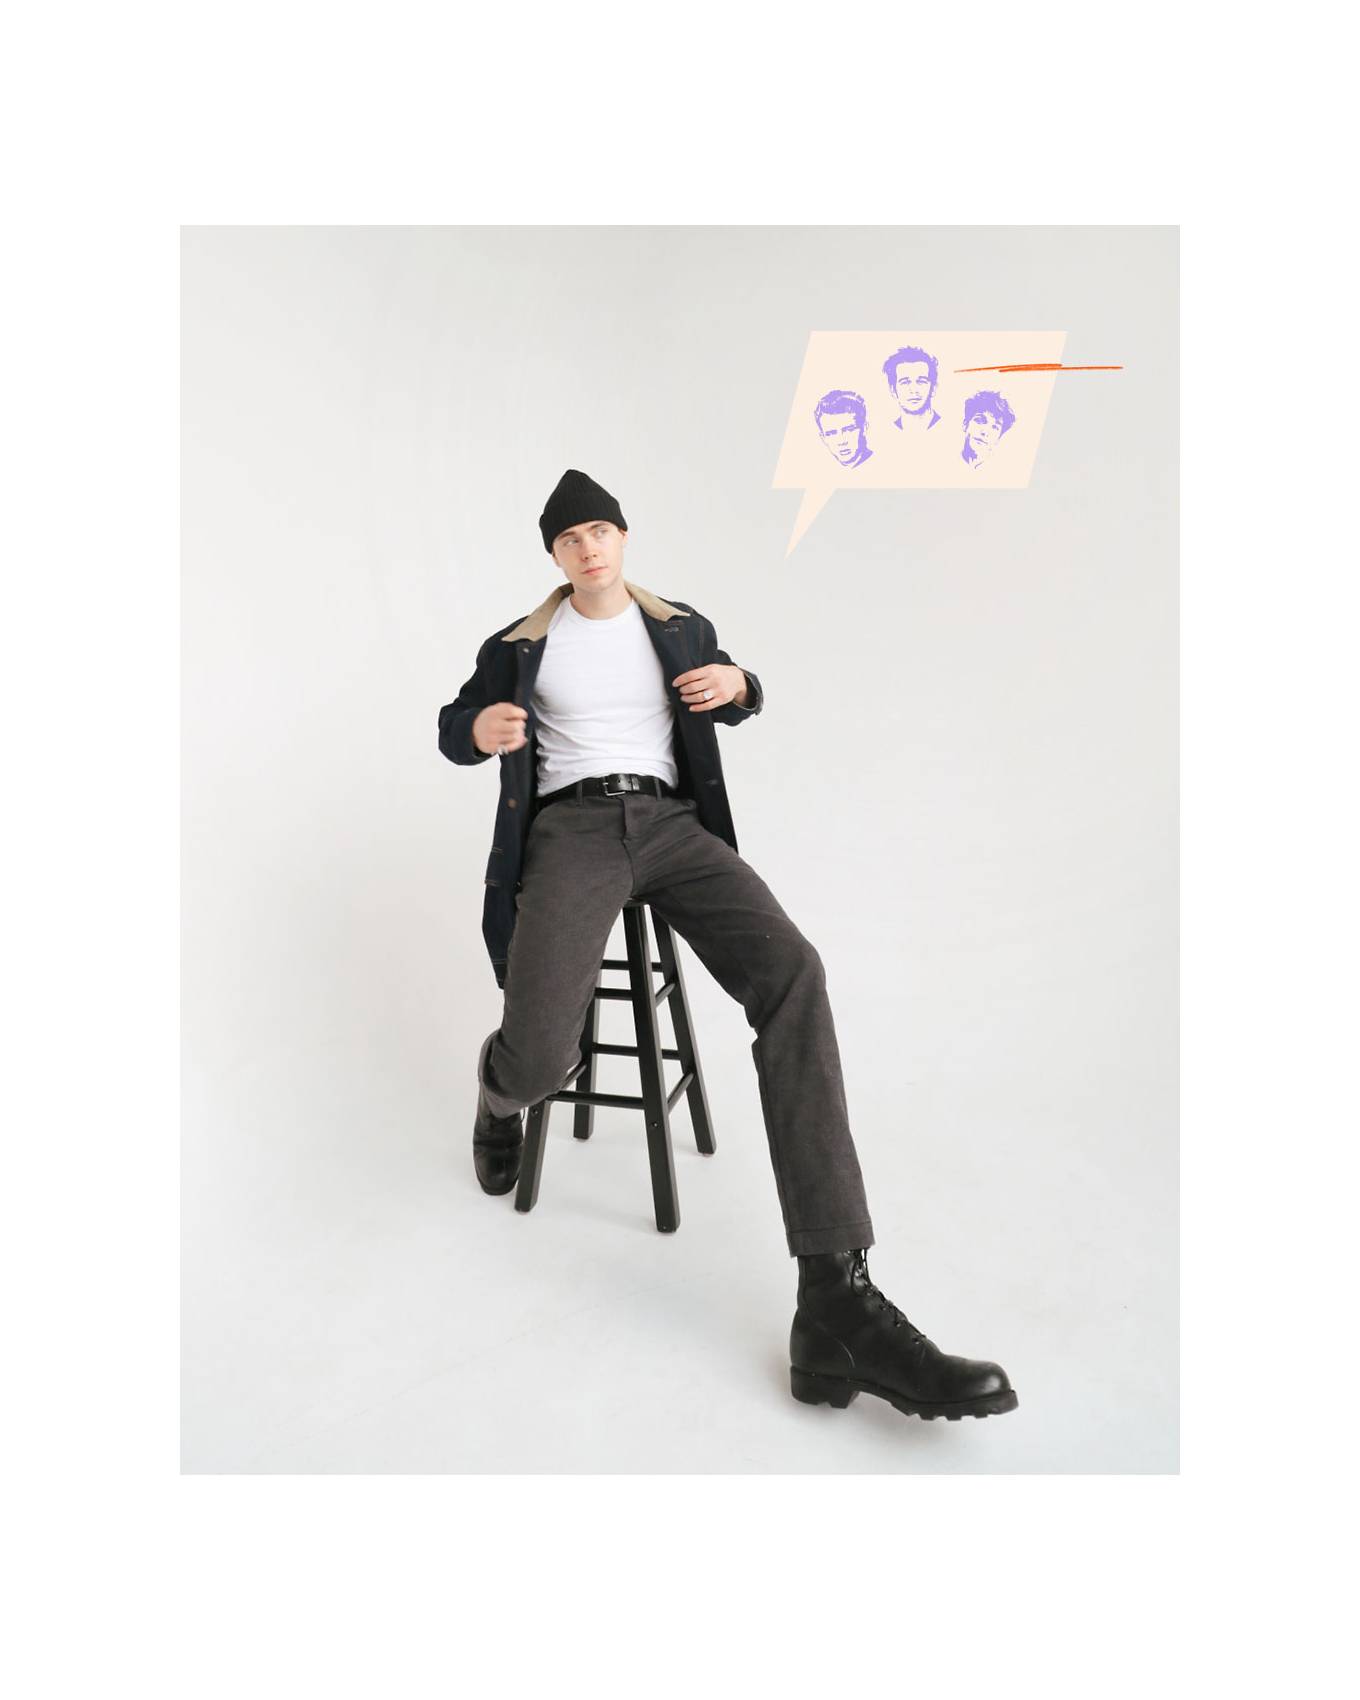 Gabe sitting on a stool against a white backdrop wearing black chinos, white tee, beanie and dark wash denim jacket with an illustrated thought bubble